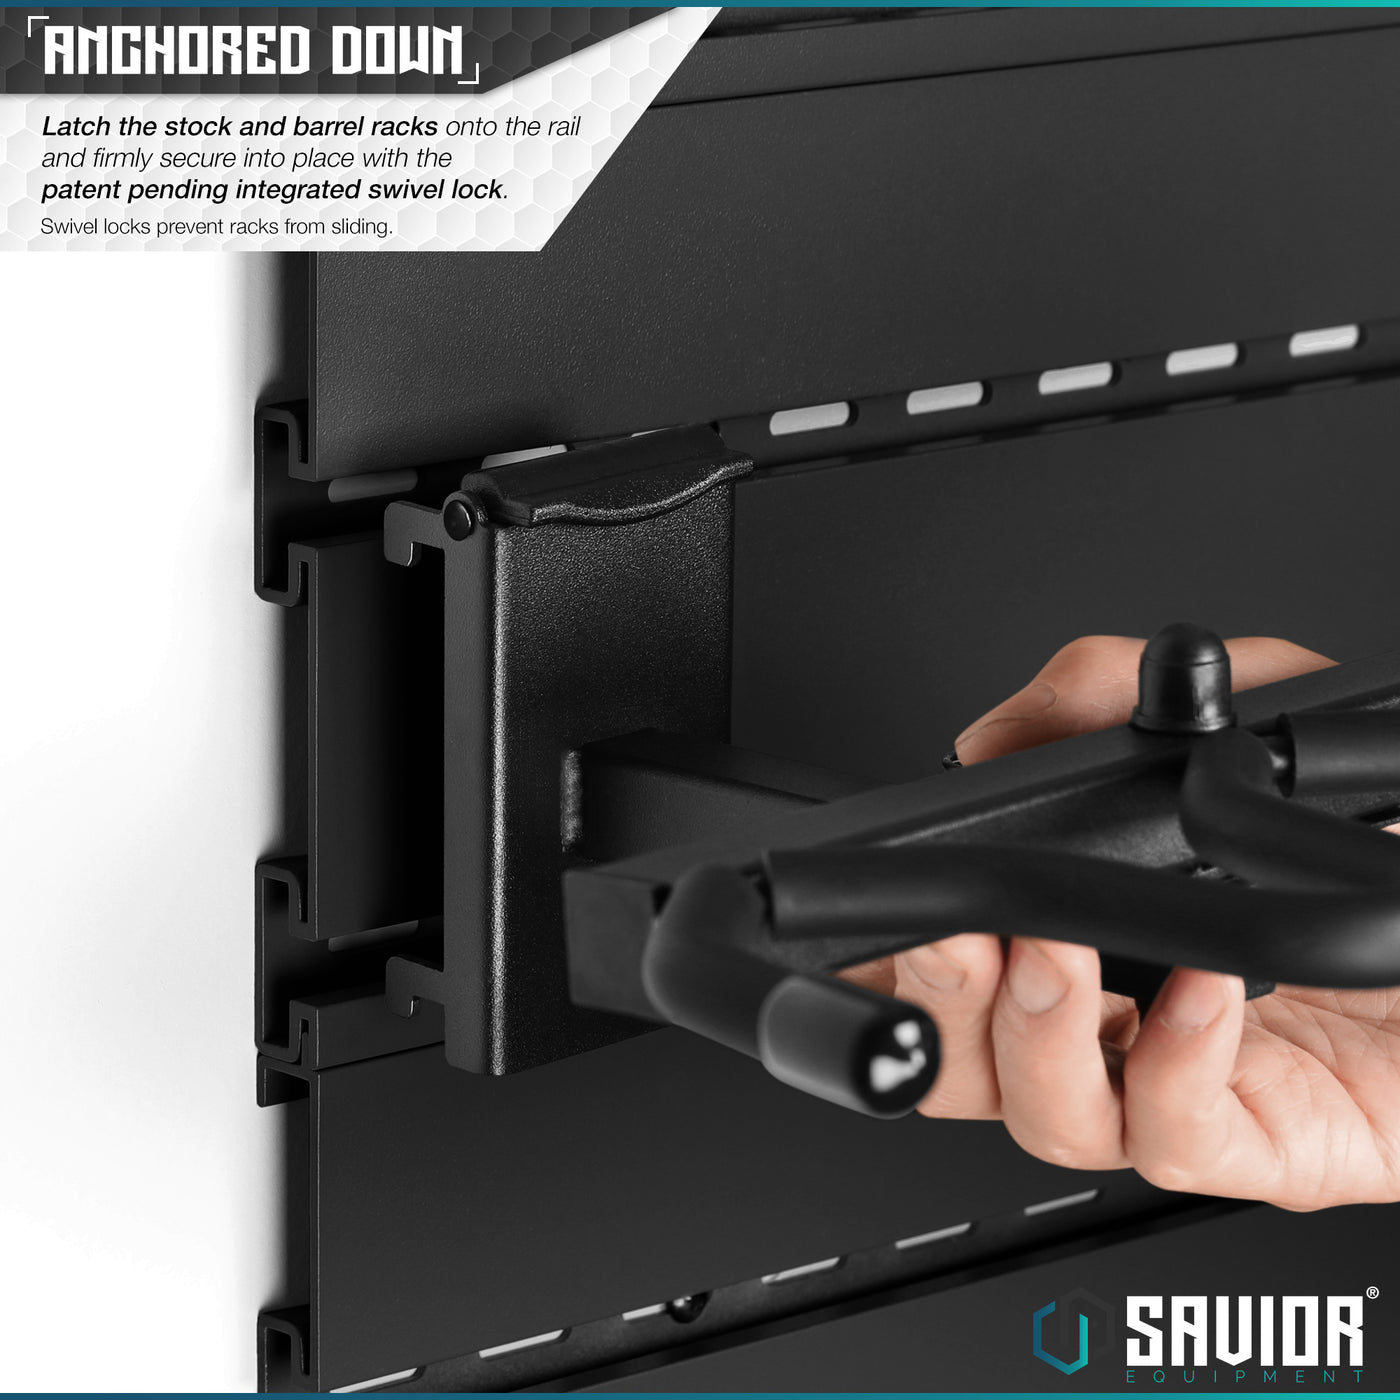 Anchored Down - Latch the stock and barrel rack onto the rail and firmly secure into place with the patent pending integrated swivel lock. Swivel locks prevent racks from sliding.